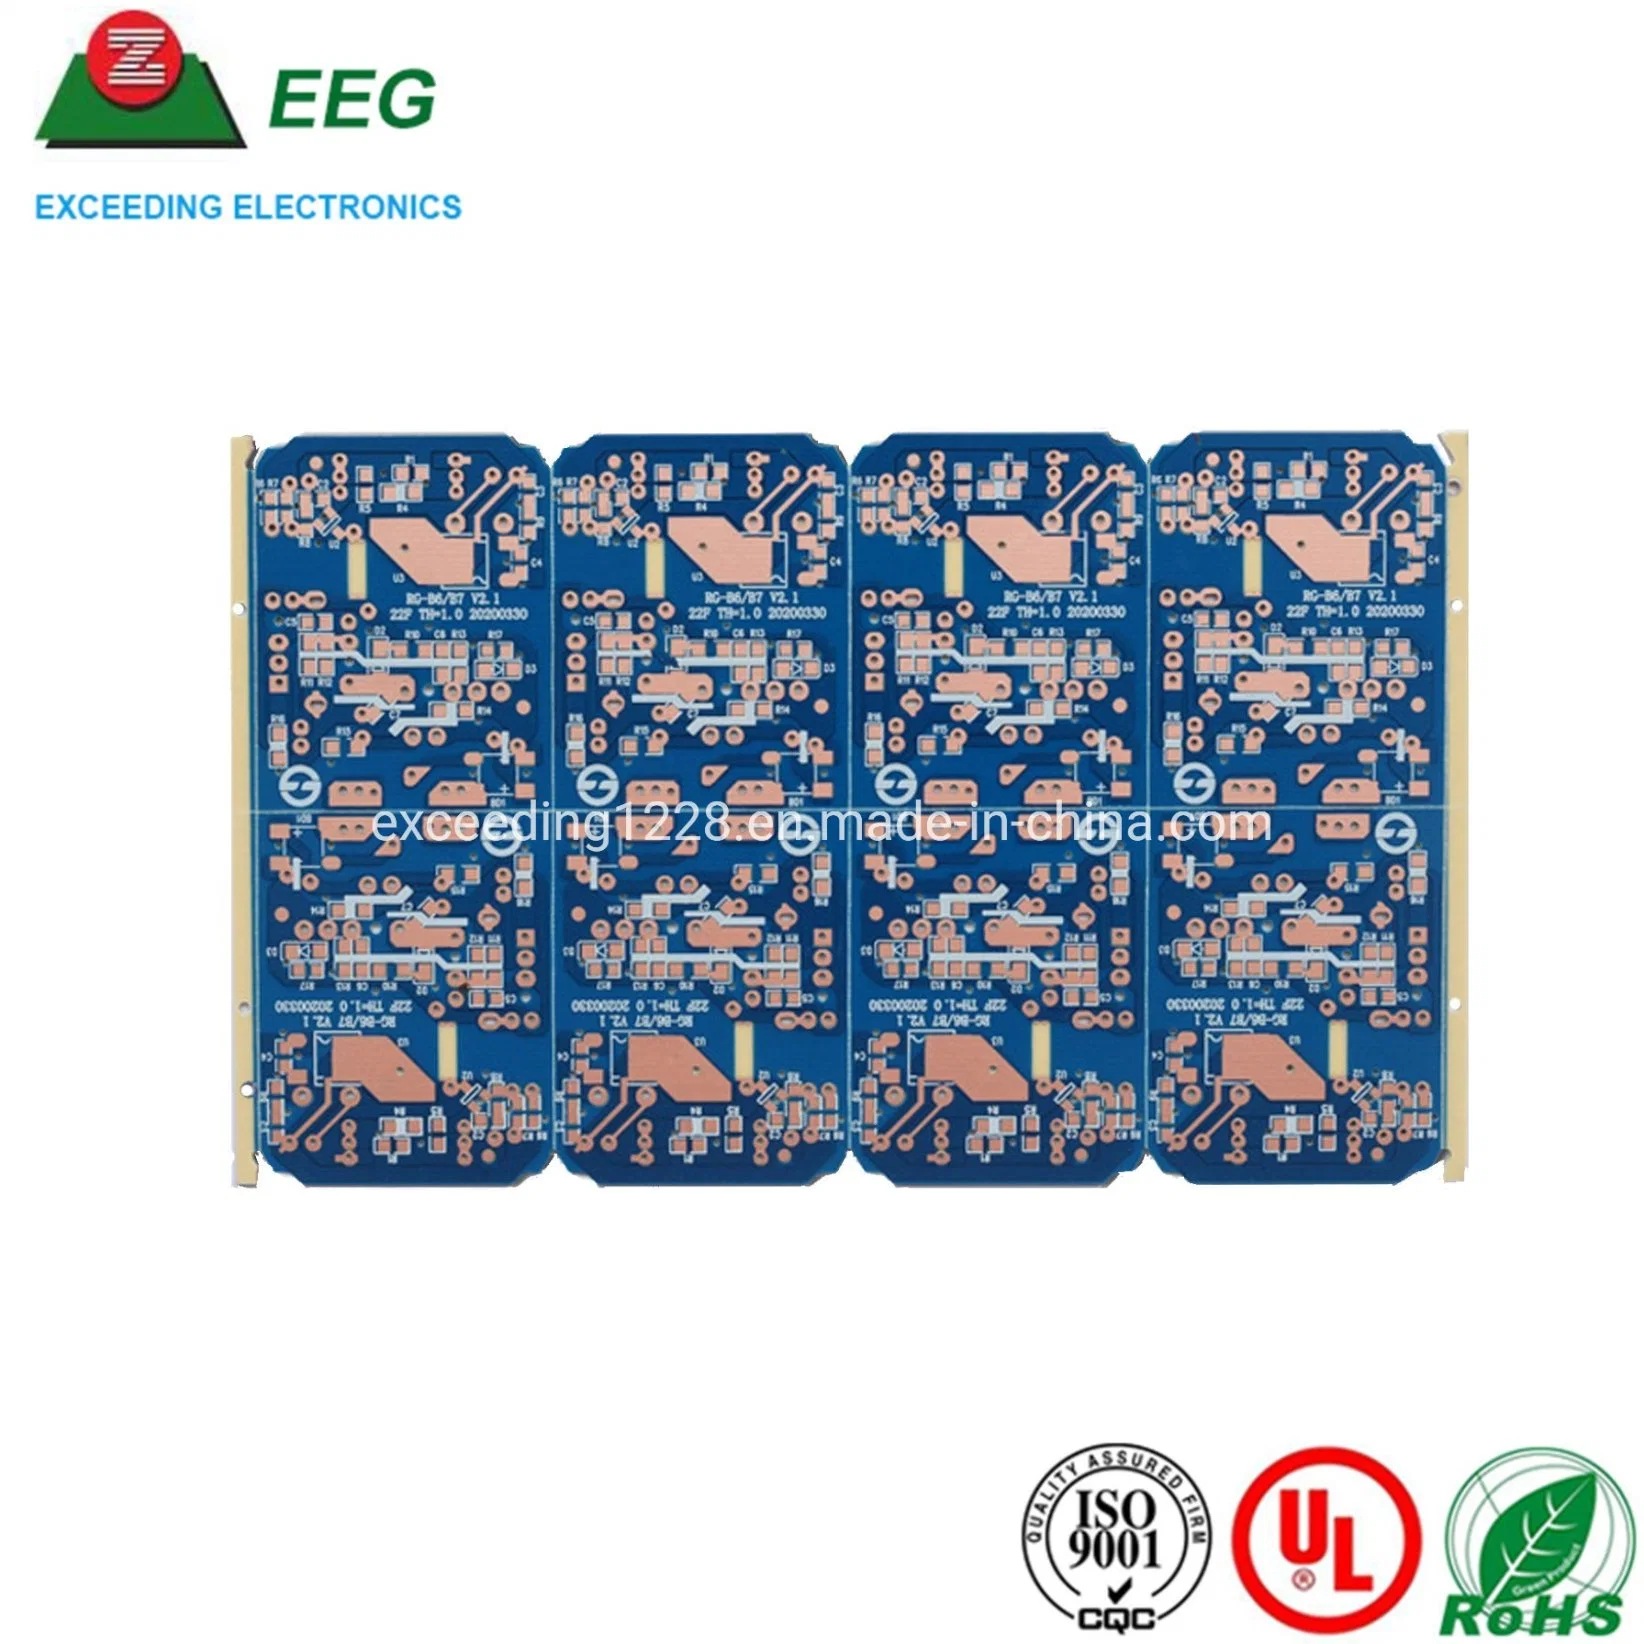 PCB Motherboard Printed Circuit Board PCB for Electronics Multilayer PCB Manufacturing Services